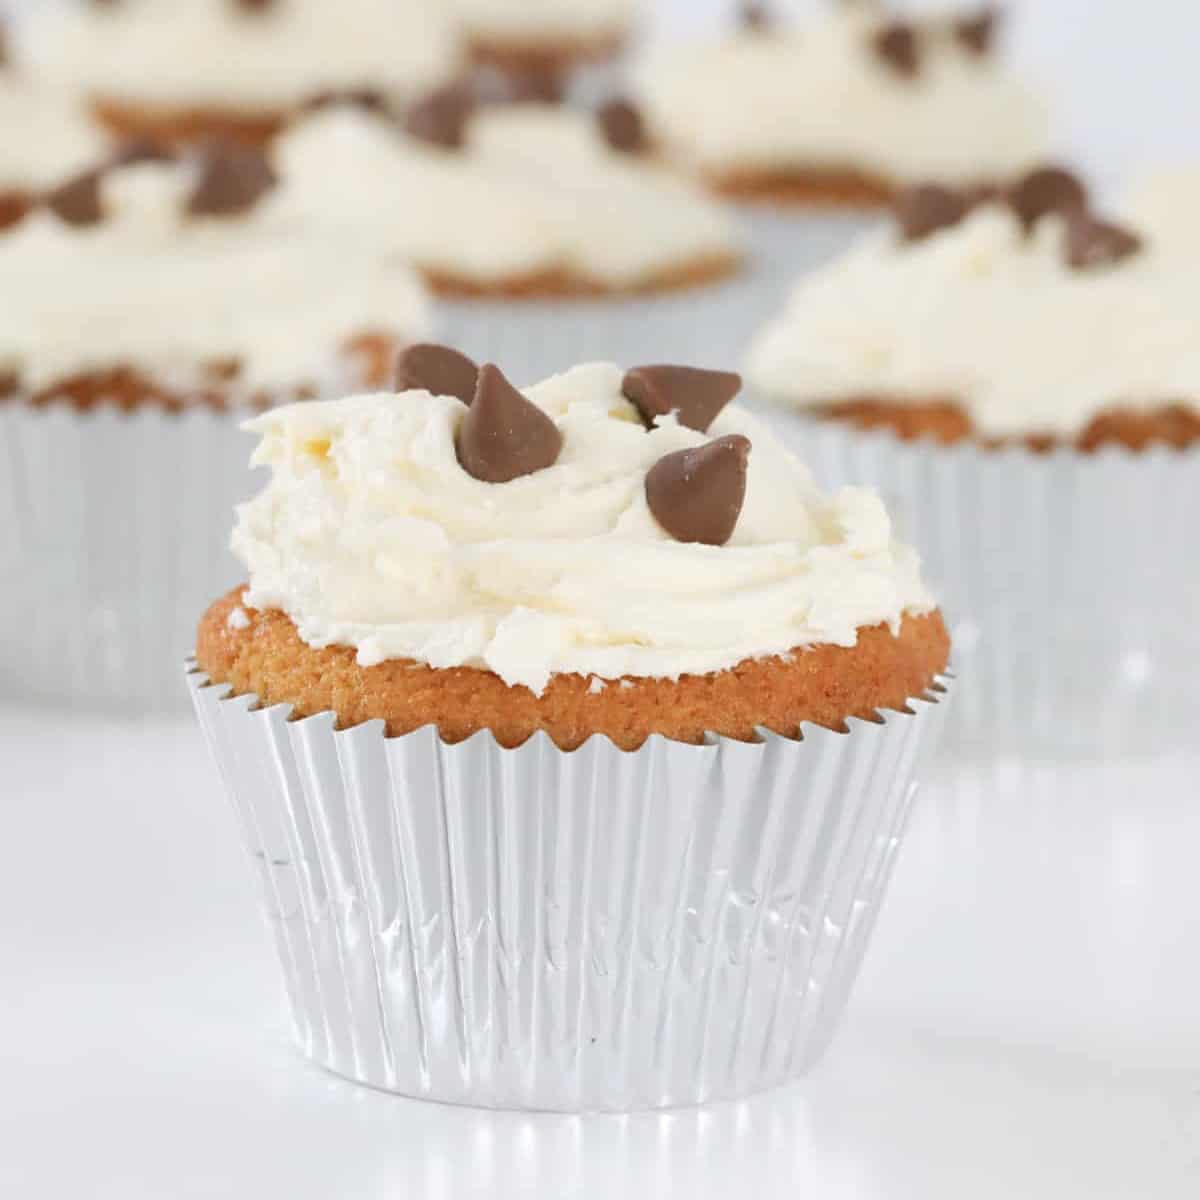 A chocolate chip cupcake with buttercream frosting.